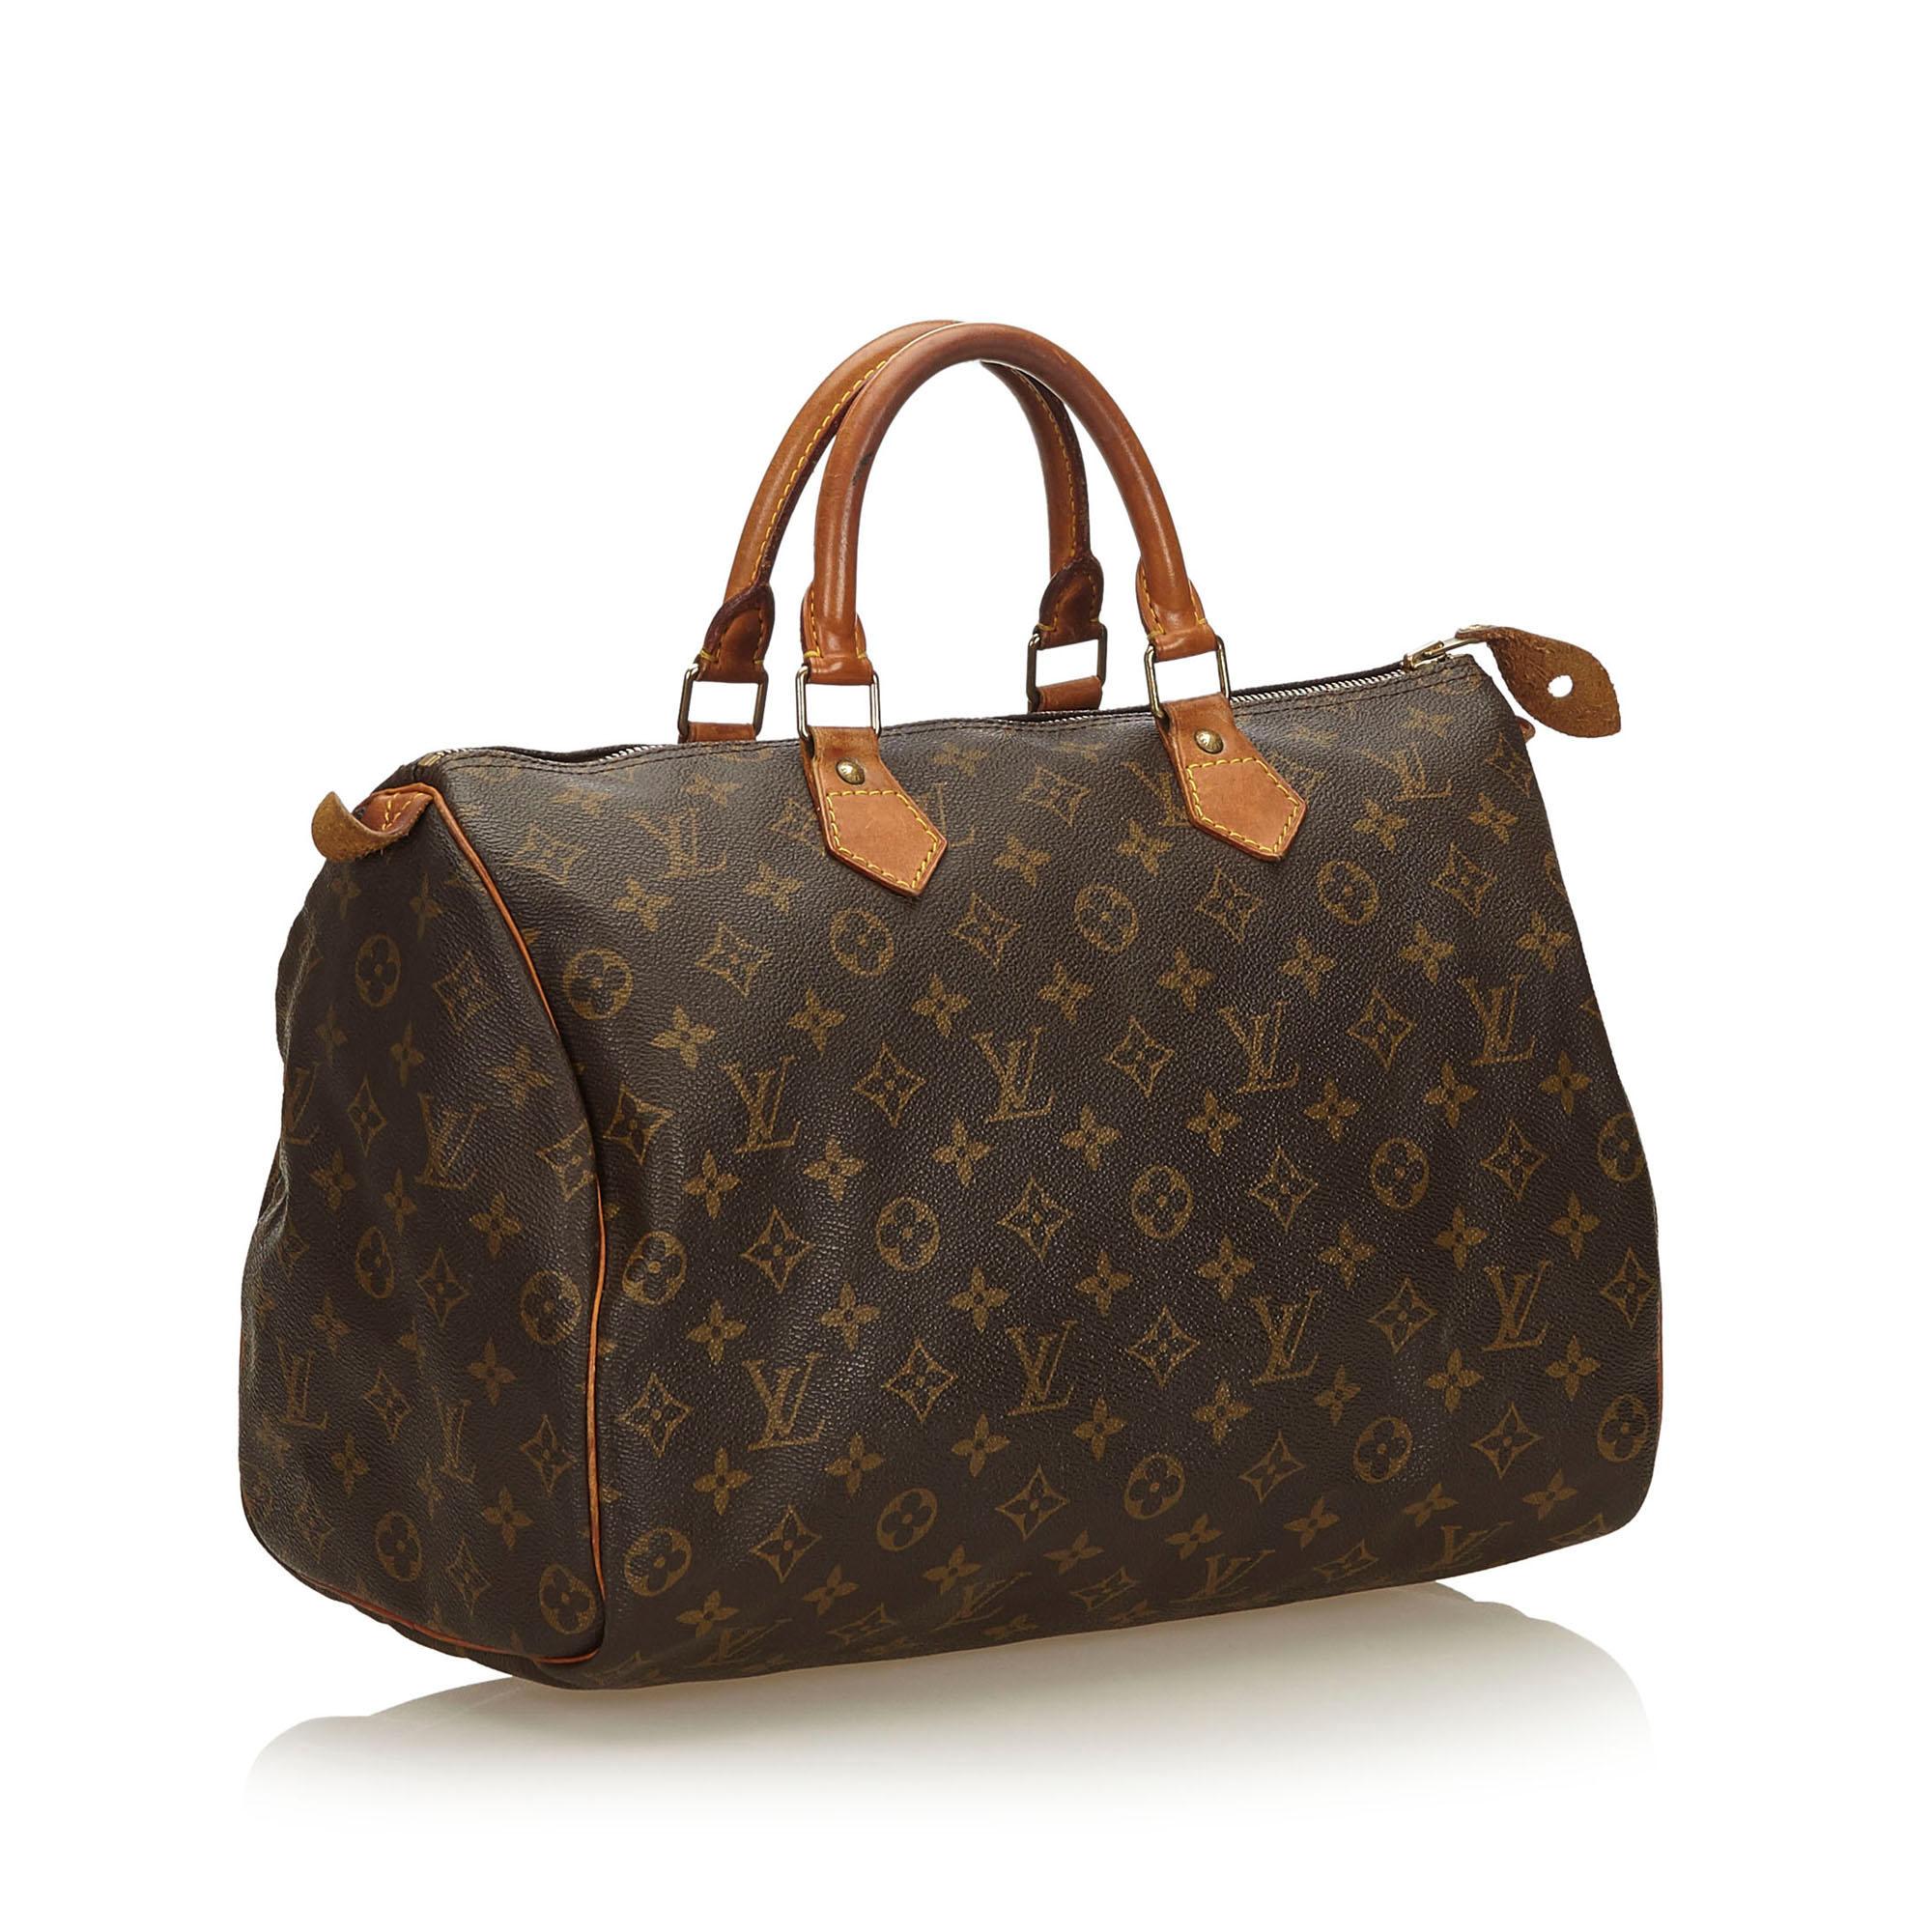 The Speedy 35 features the Monogram canvas, vachetta handles and trim, a top zip closure, and an interior pocket.

It carries a B condition rating.

Dimensions: 
Length 23.00 cm
Width 35.00 cm
Depth 18.00 cm
Hand Drop 10.00 cm

Inclusions: No longer